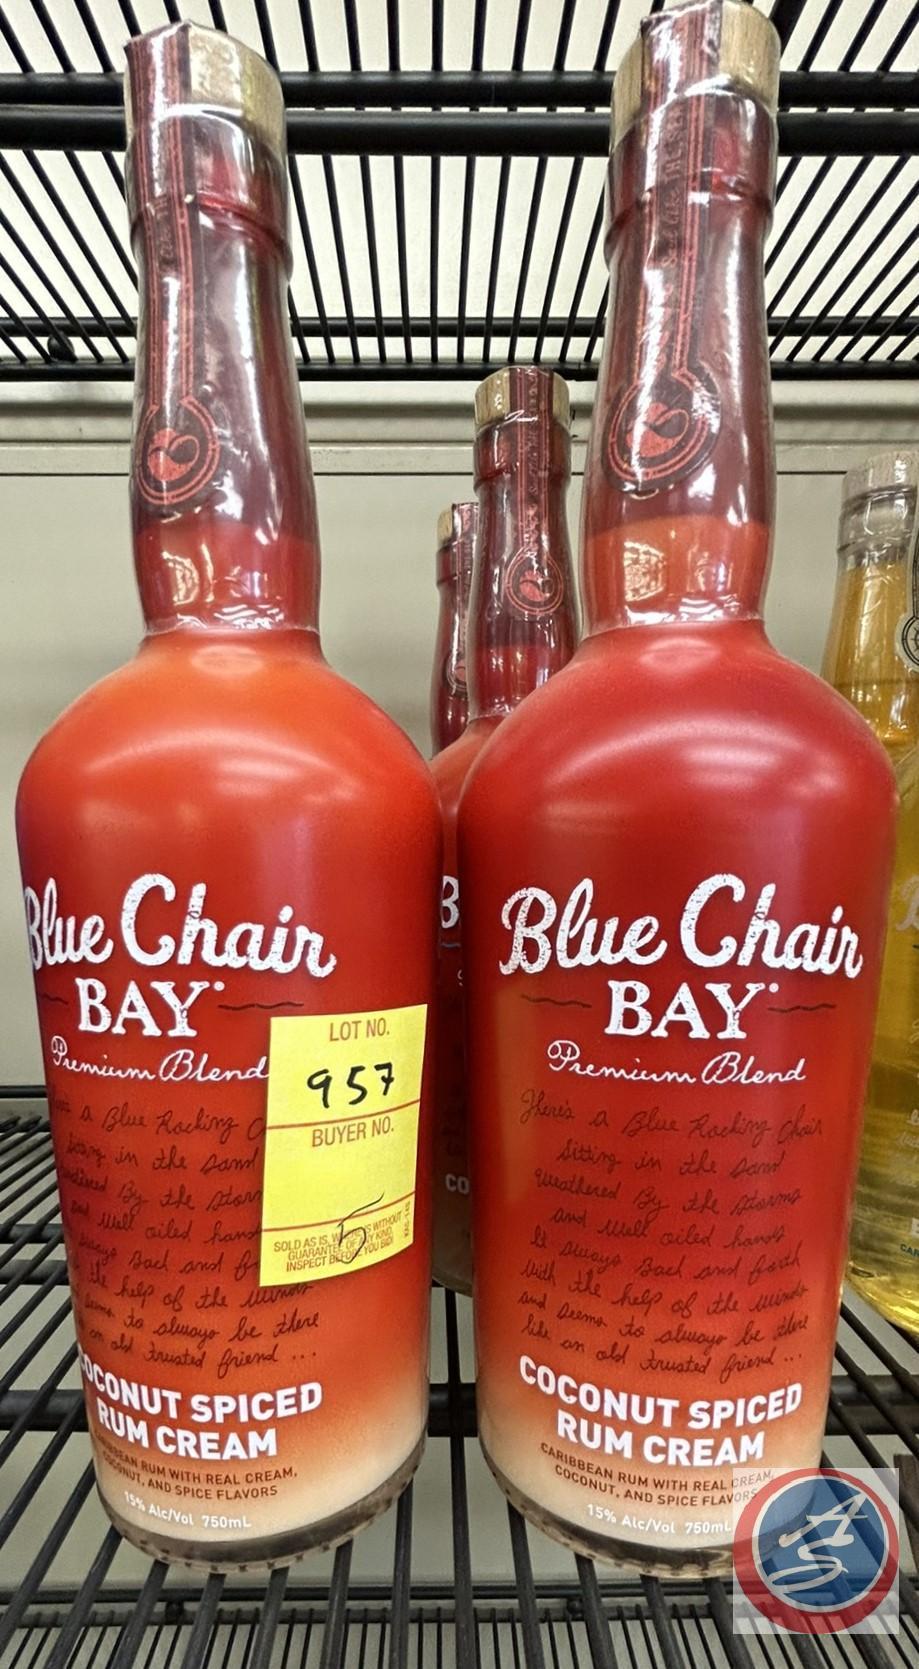 (5) Blue Chair Bay coconut spiced rum cream (times the money)